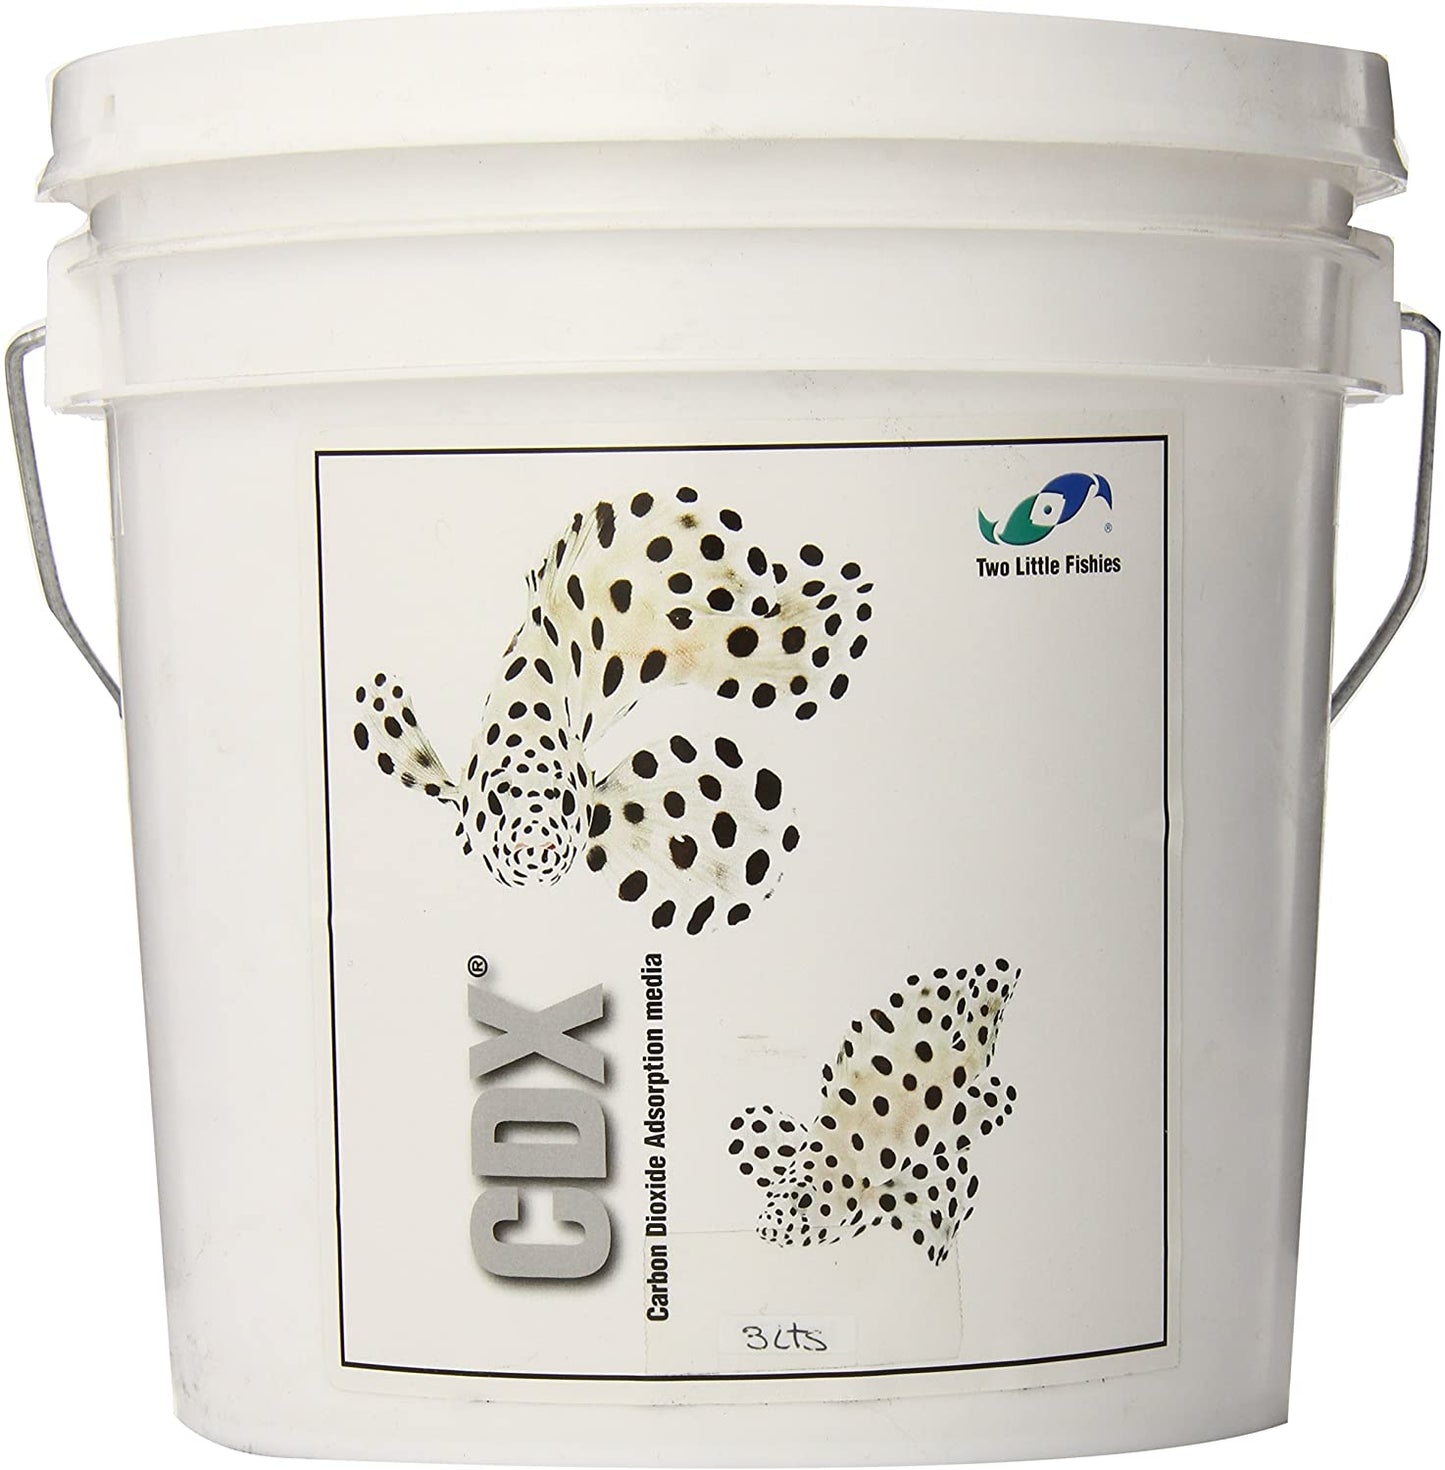 Two Little Fishies CDX Carbon Dioxide Absorption Media 3L